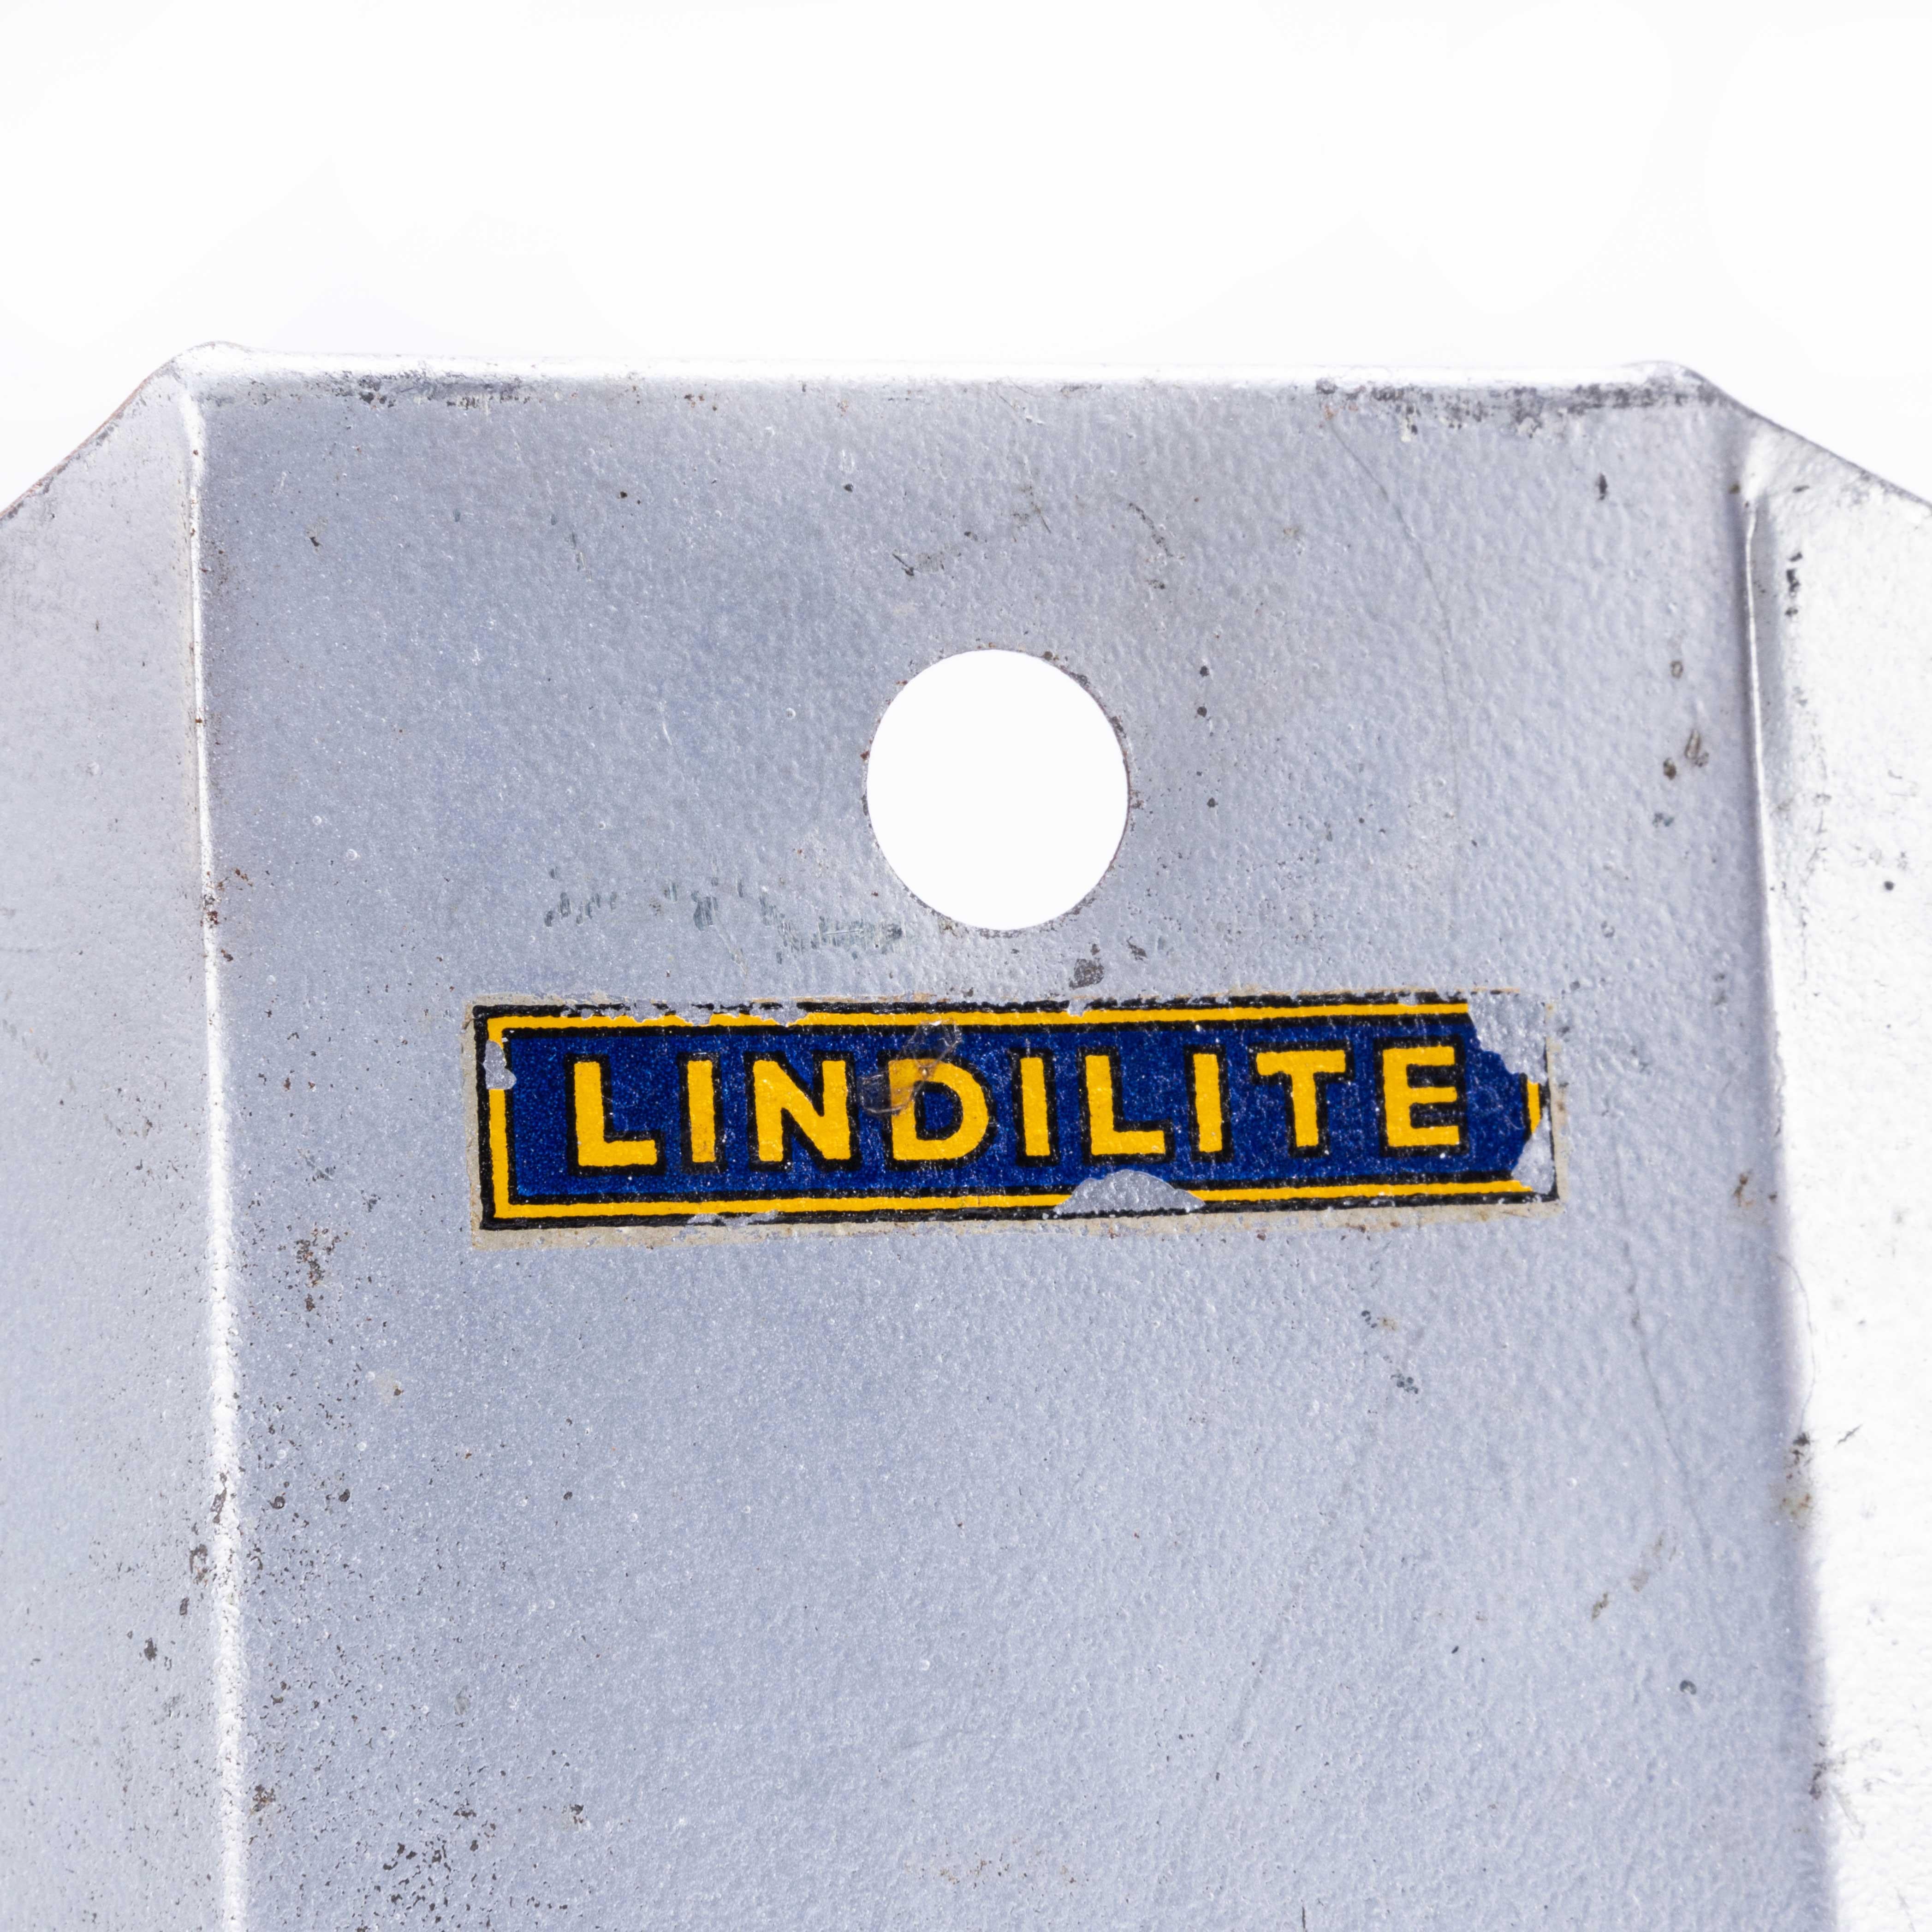 English 1950's Lindilite Safety Candlestick For Sale